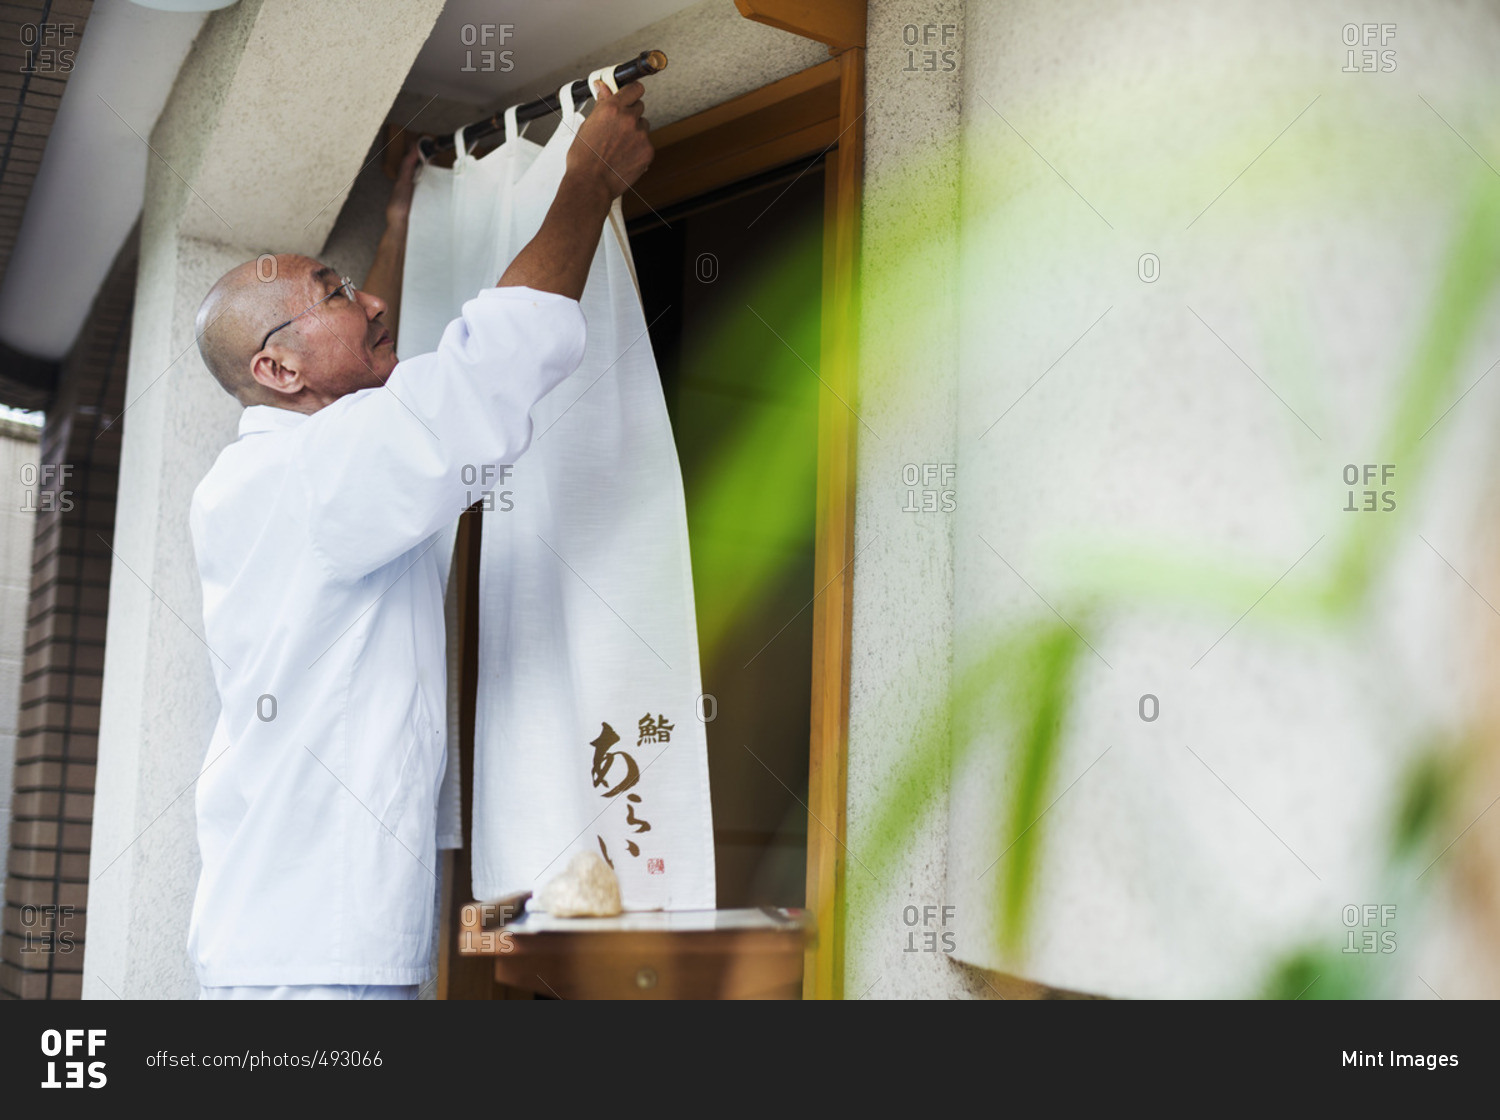 A chef in a small commercial kitchen, an itamae or master chef drawing a curtain across a door.